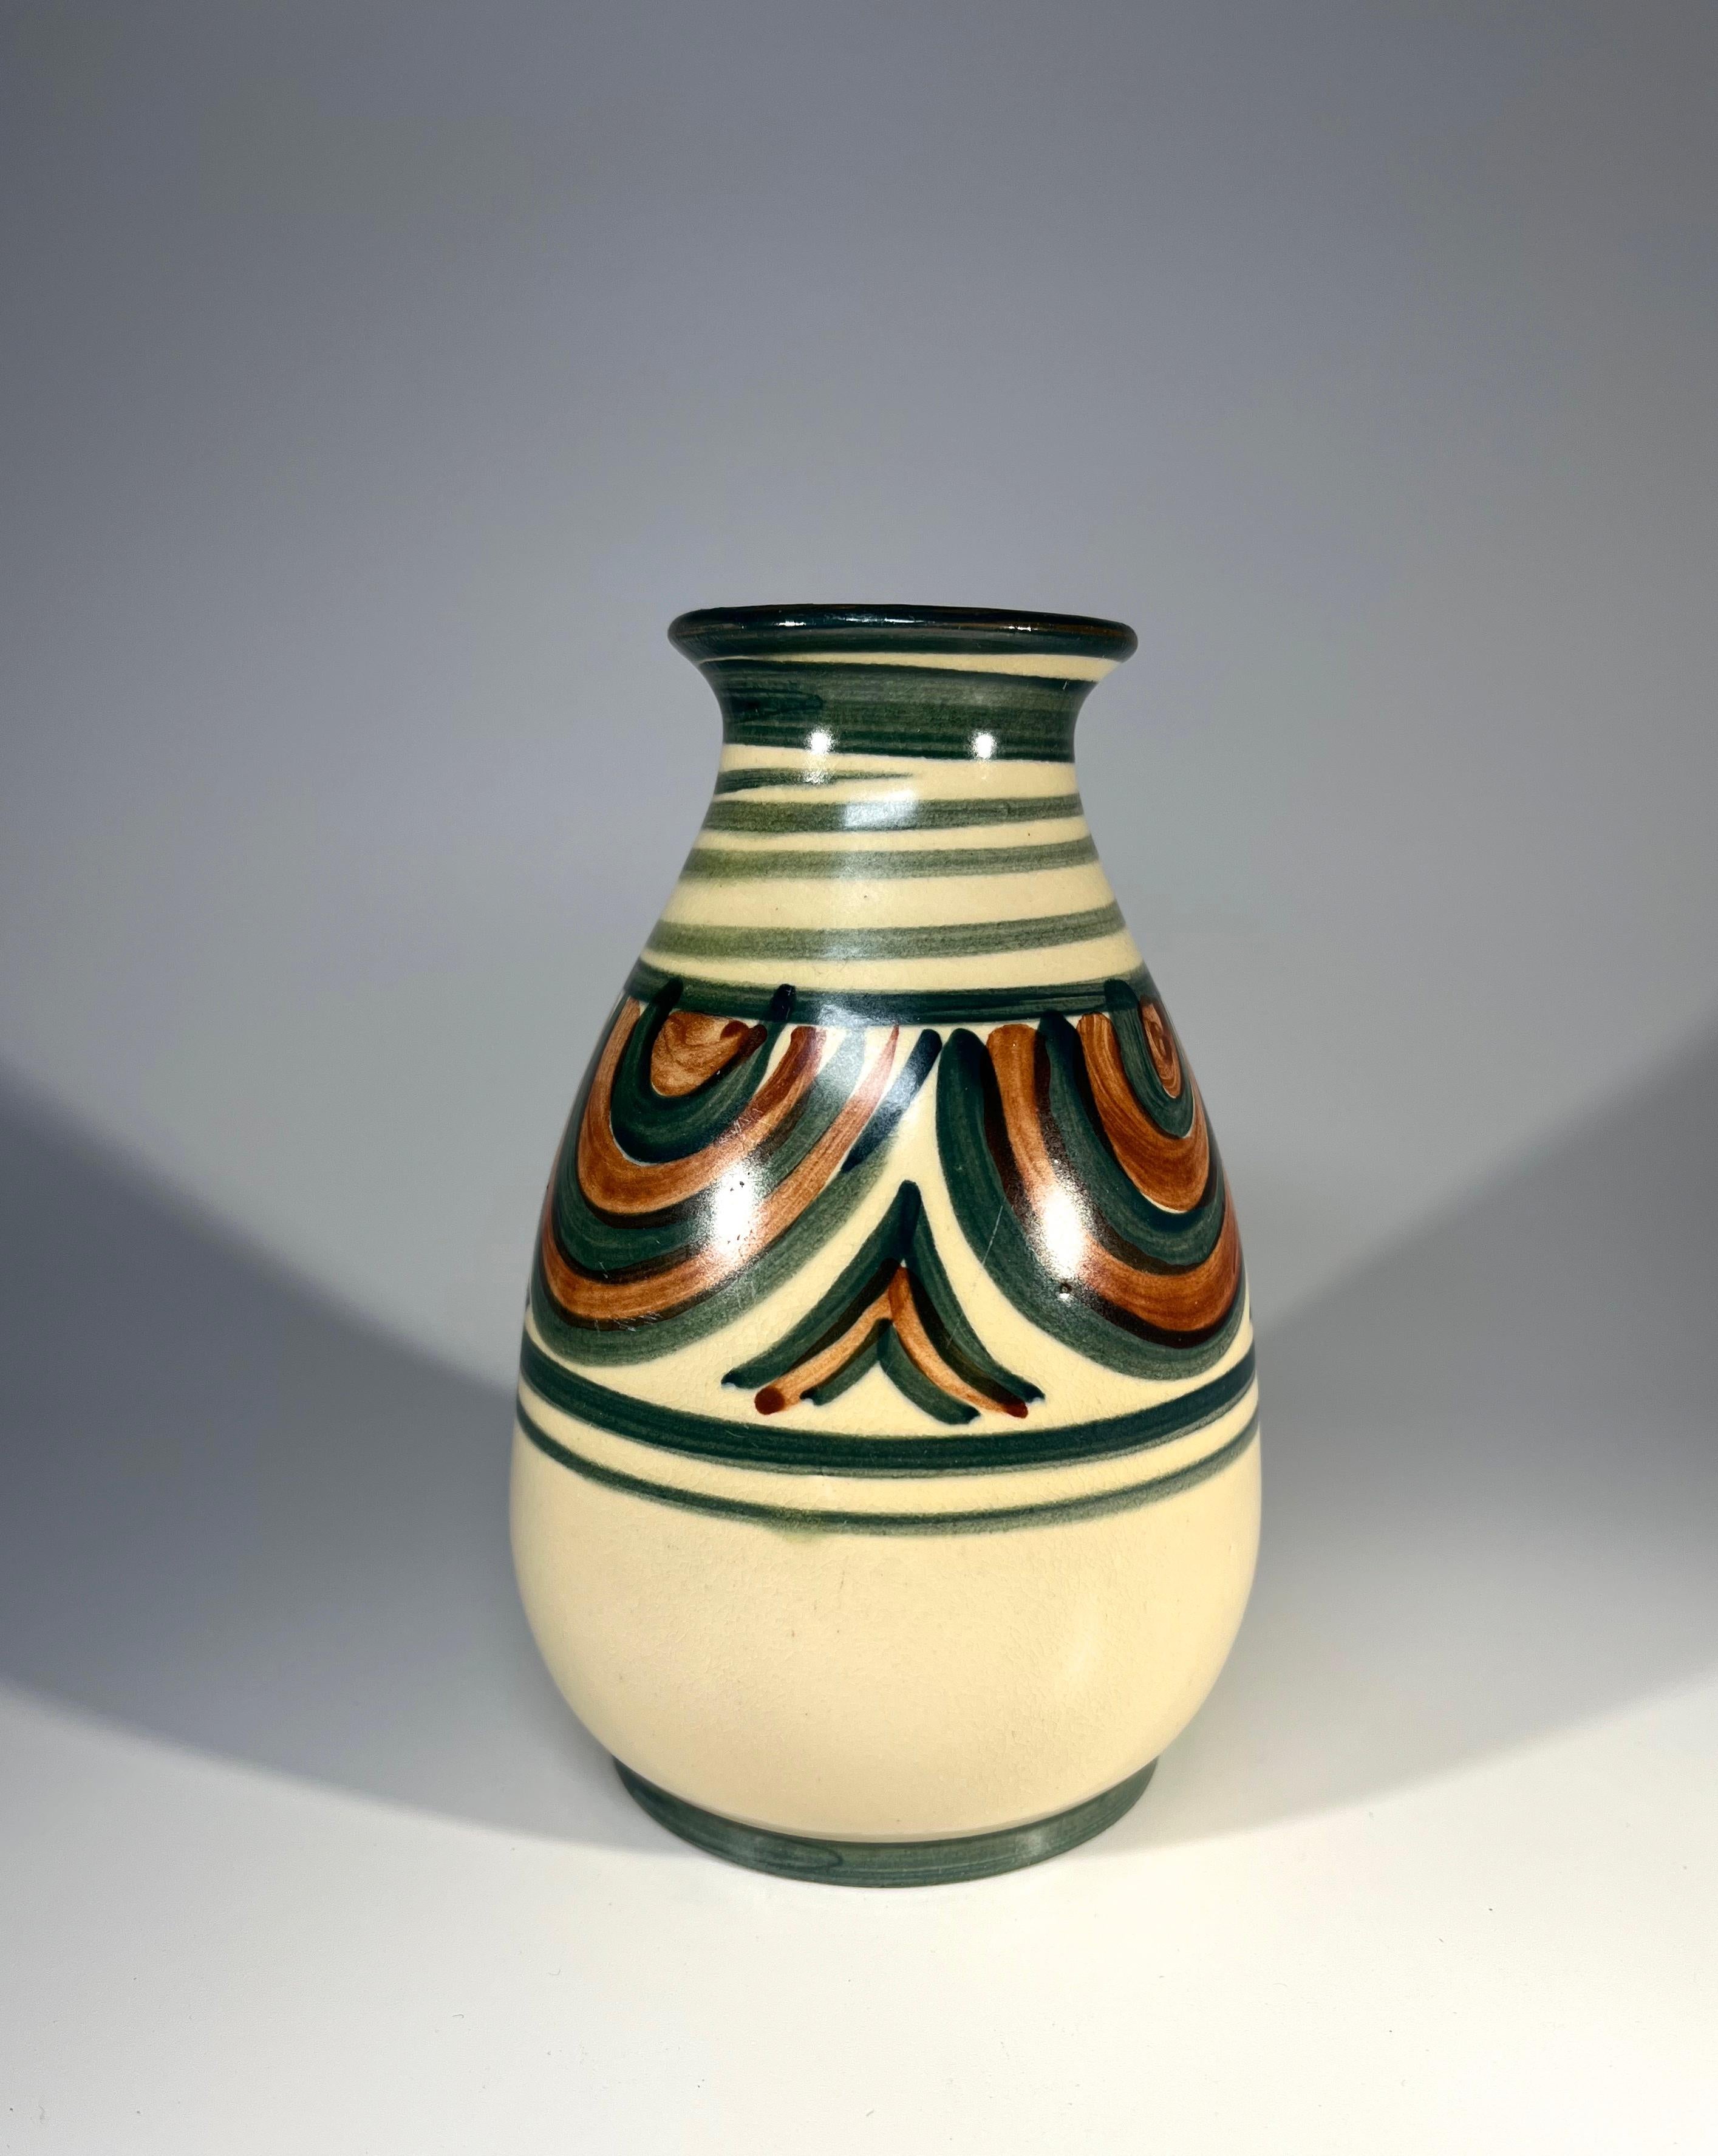 Lovely understated Art Deco ceramic vase, decorated in soft earth tones by Upsala Ekeby of Sweden
A very early piece from Upsala Ekeby in wonderful condition
Circa 1922-1930
Signed UE, 1508/1534 to base
Height 5 inch, Diameter 3.5 inch
Very good